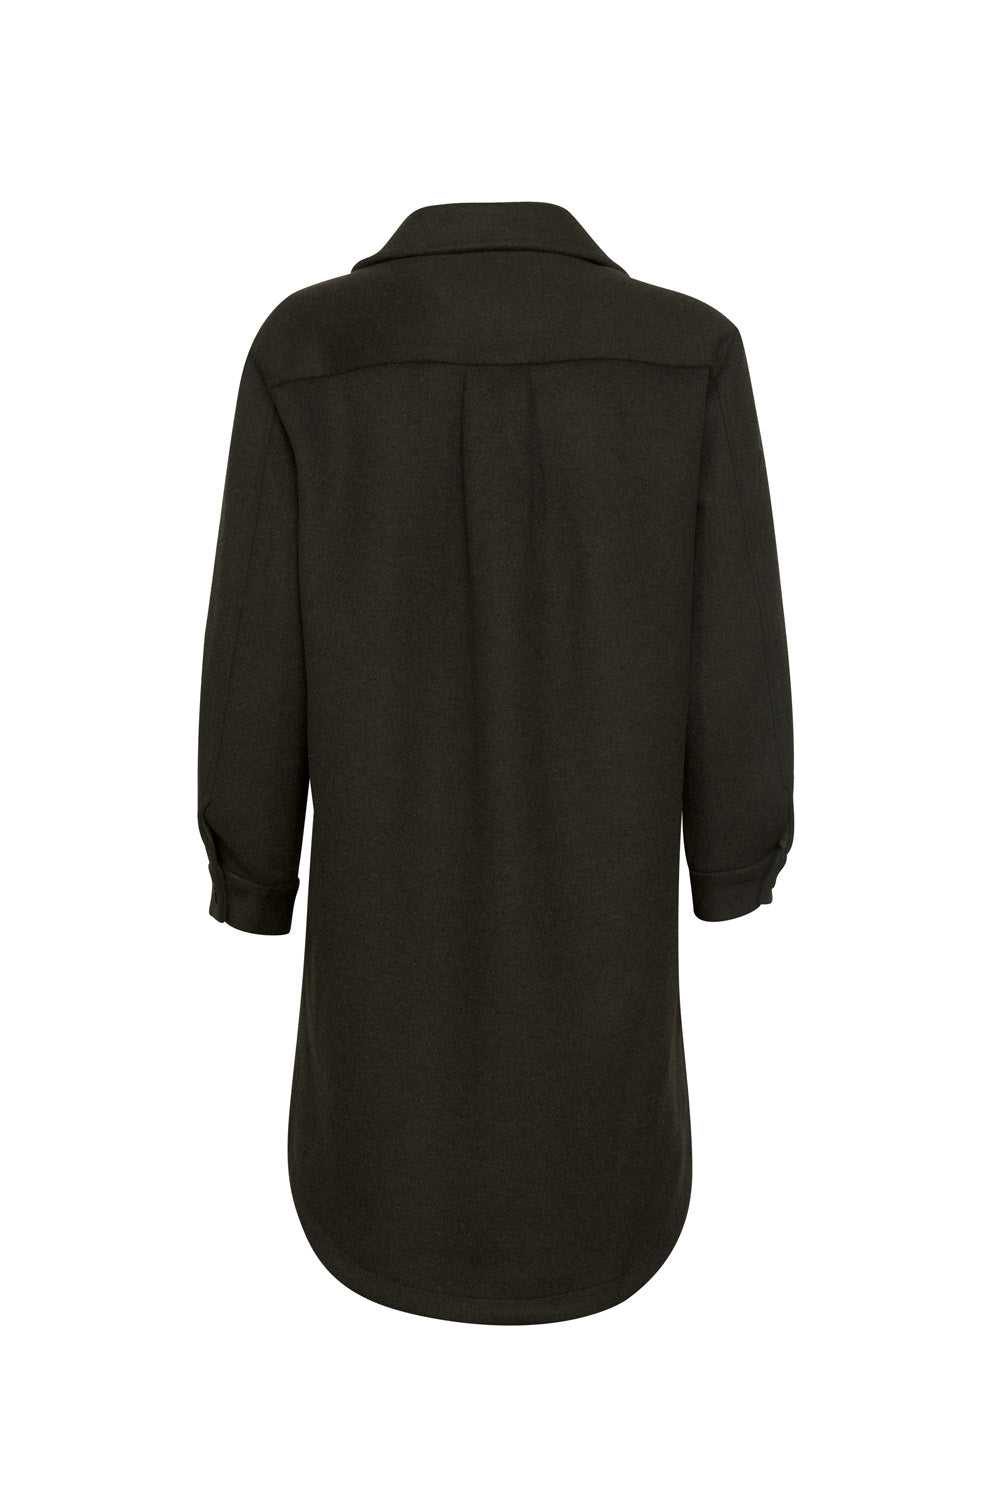 MADLY SWEETLY SUPREME COAT - OLIVE - THE VOGUE STORE